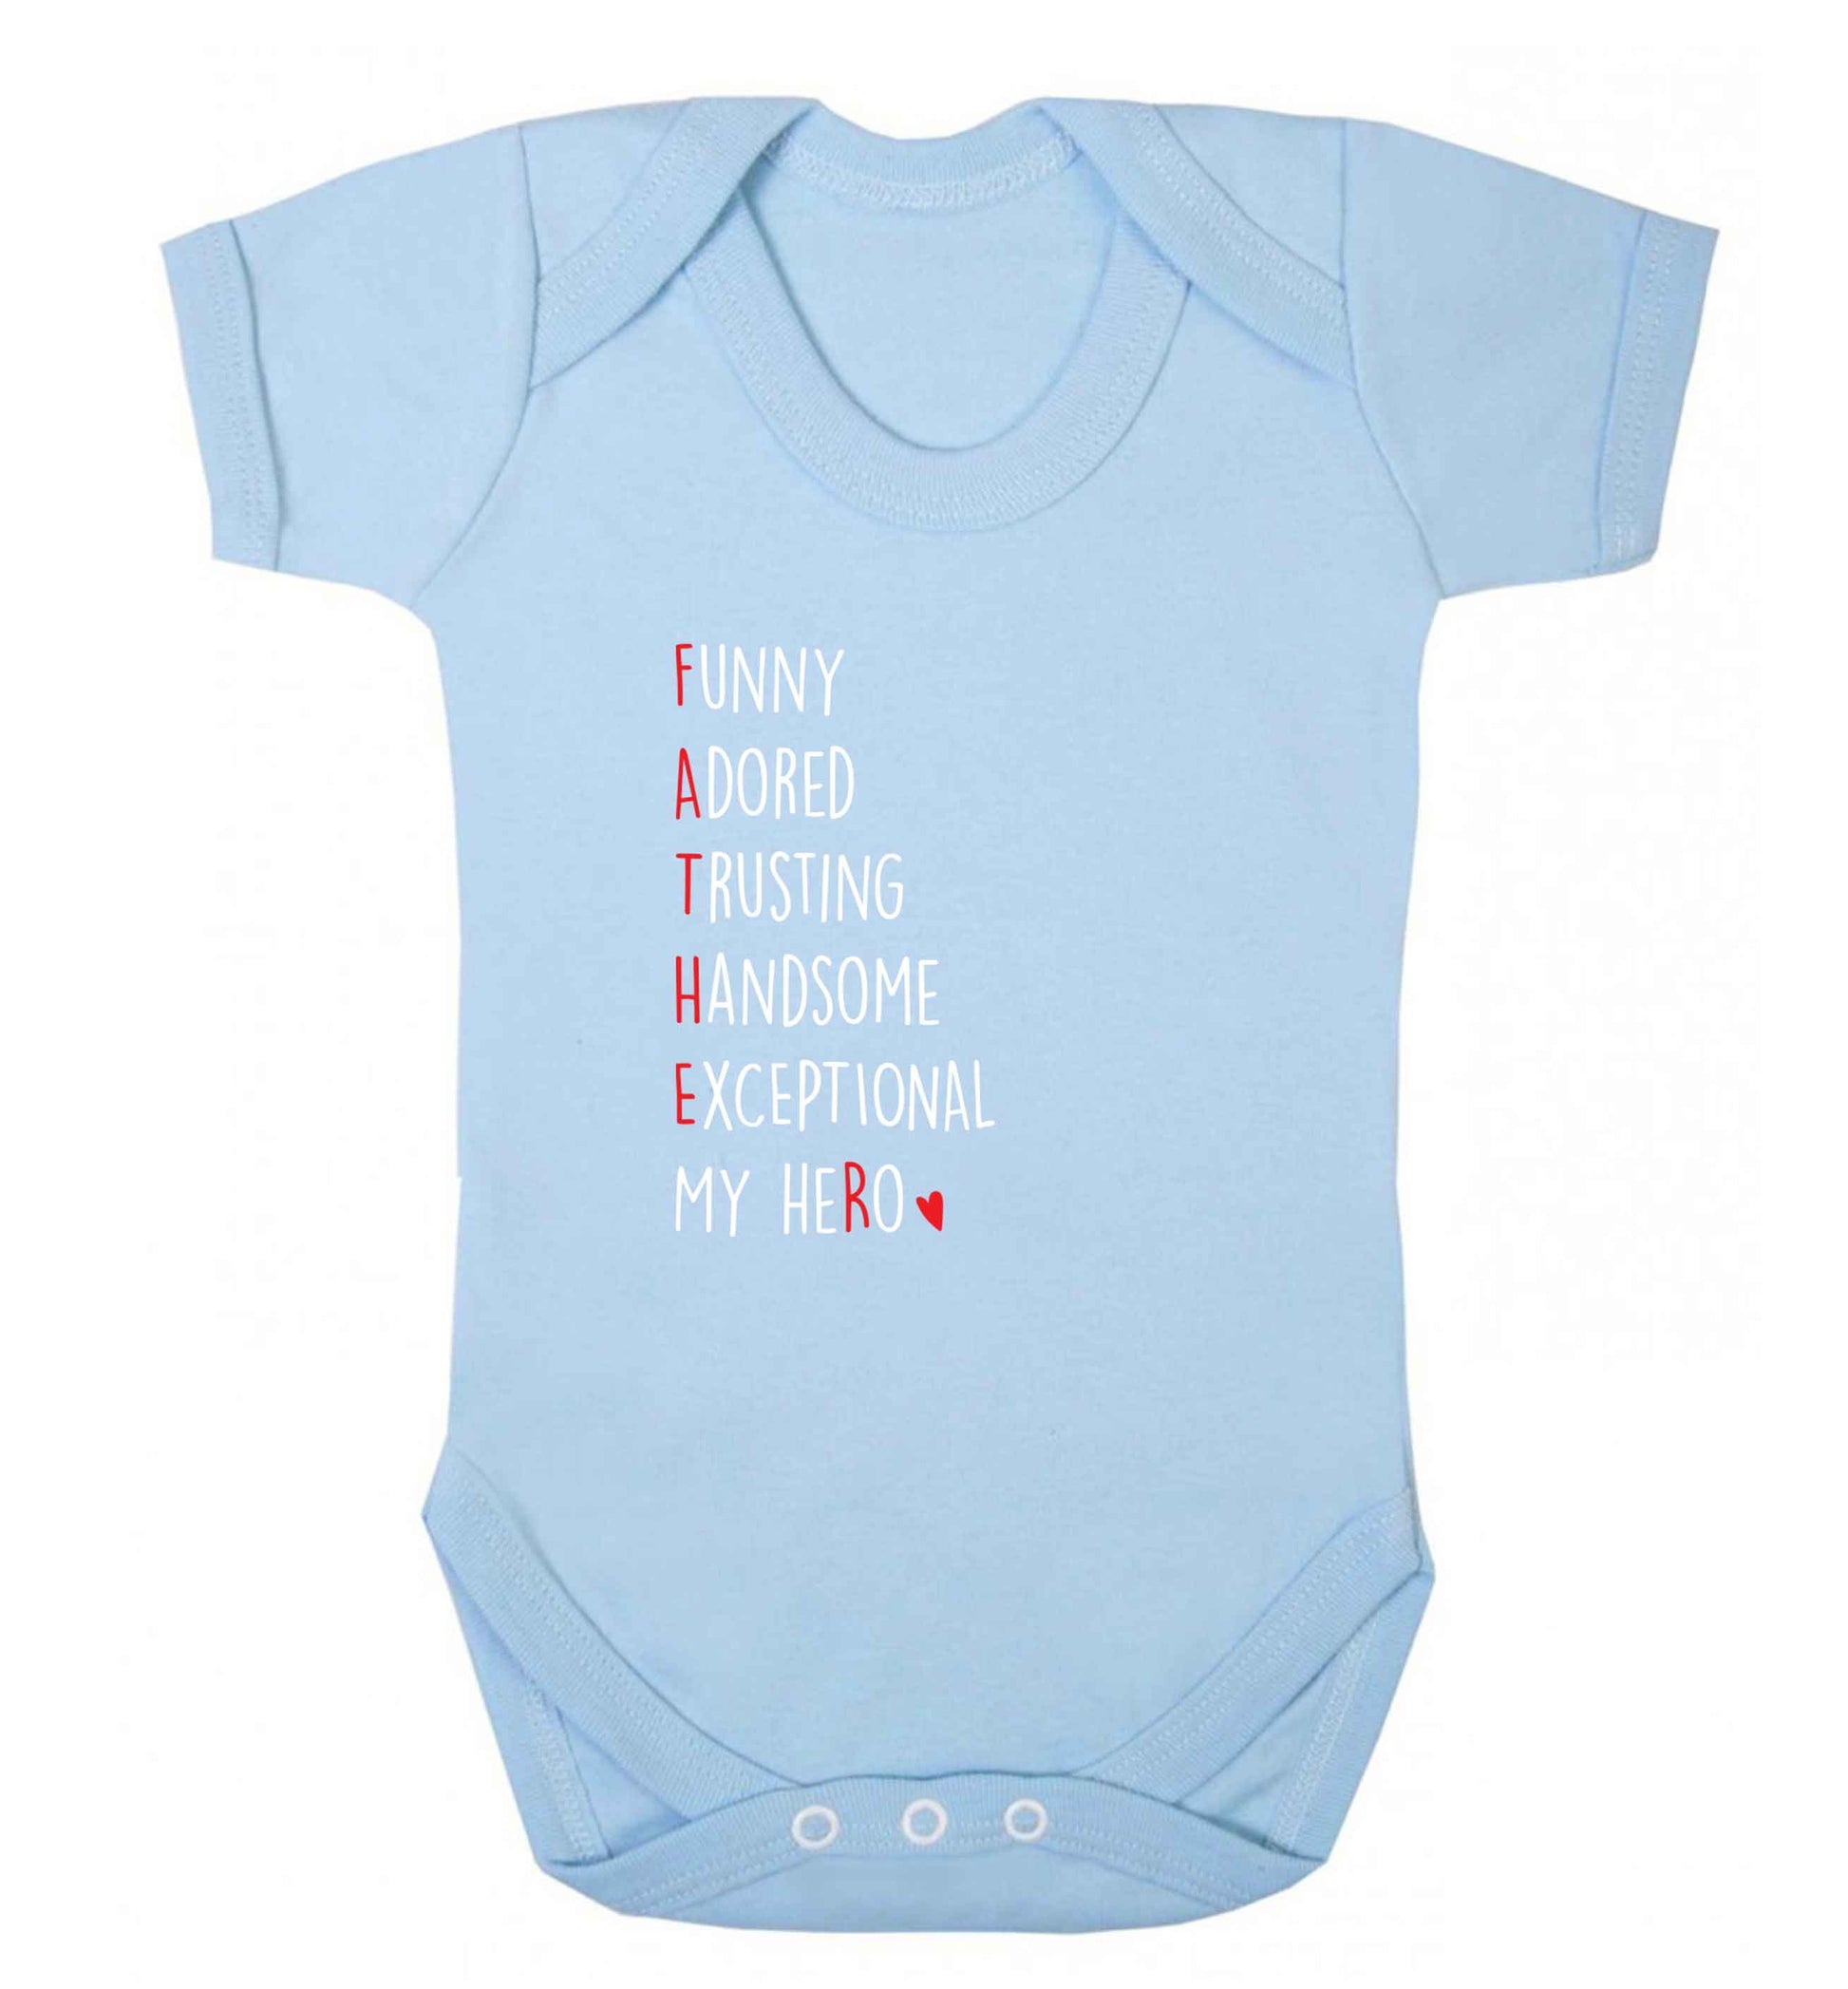 Father meaning hero acrostic poem baby vest pale blue 18-24 months